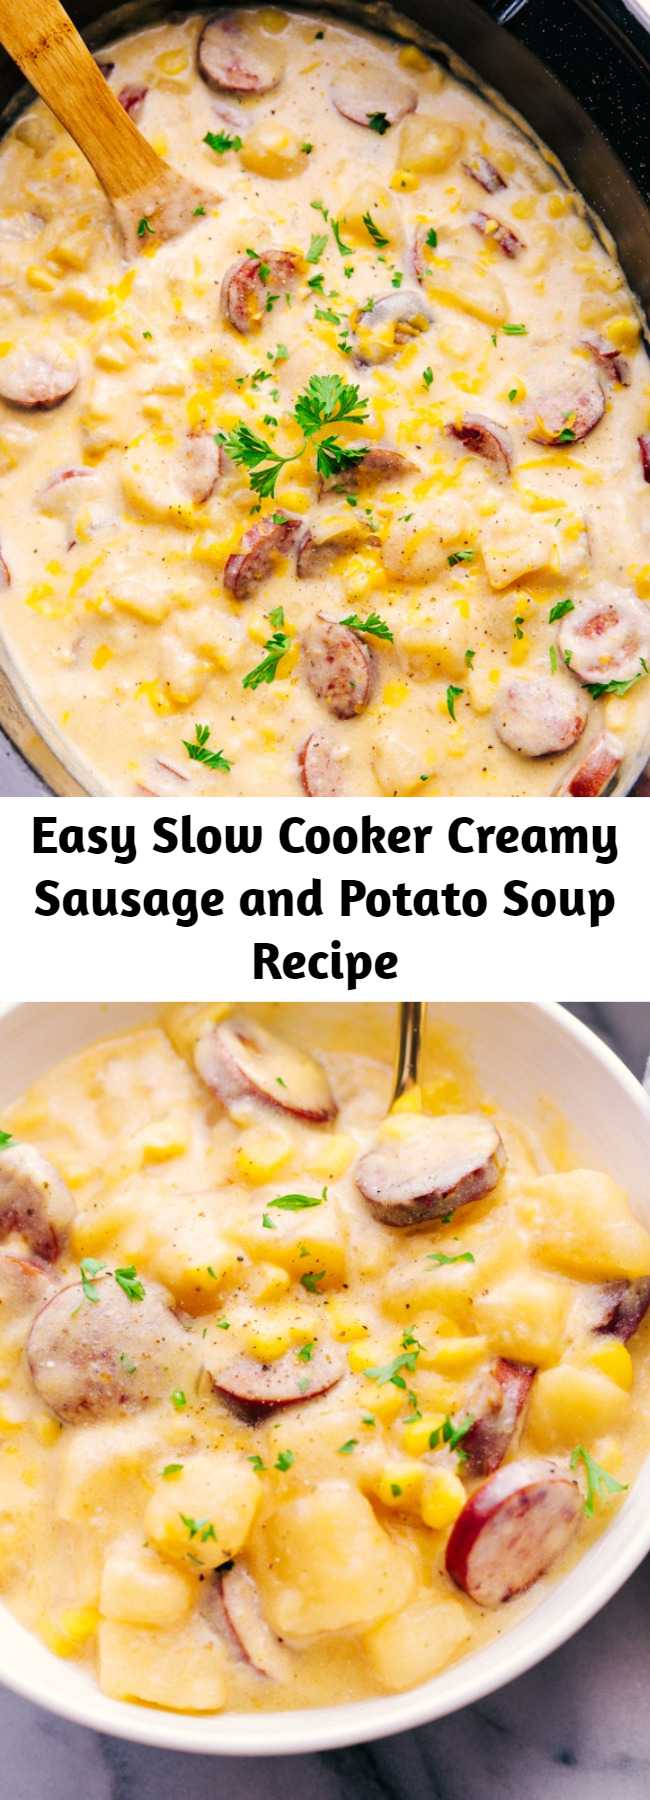 Easy Slow Cooker Creamy Sausage and Potato Soup Recipe - Slow Cooker Sausage and Potato Soup is filled with Andouille sausage, cubed potatoes, corn, and cheese, the perfect comfort meal for a weekend you can set and forget.